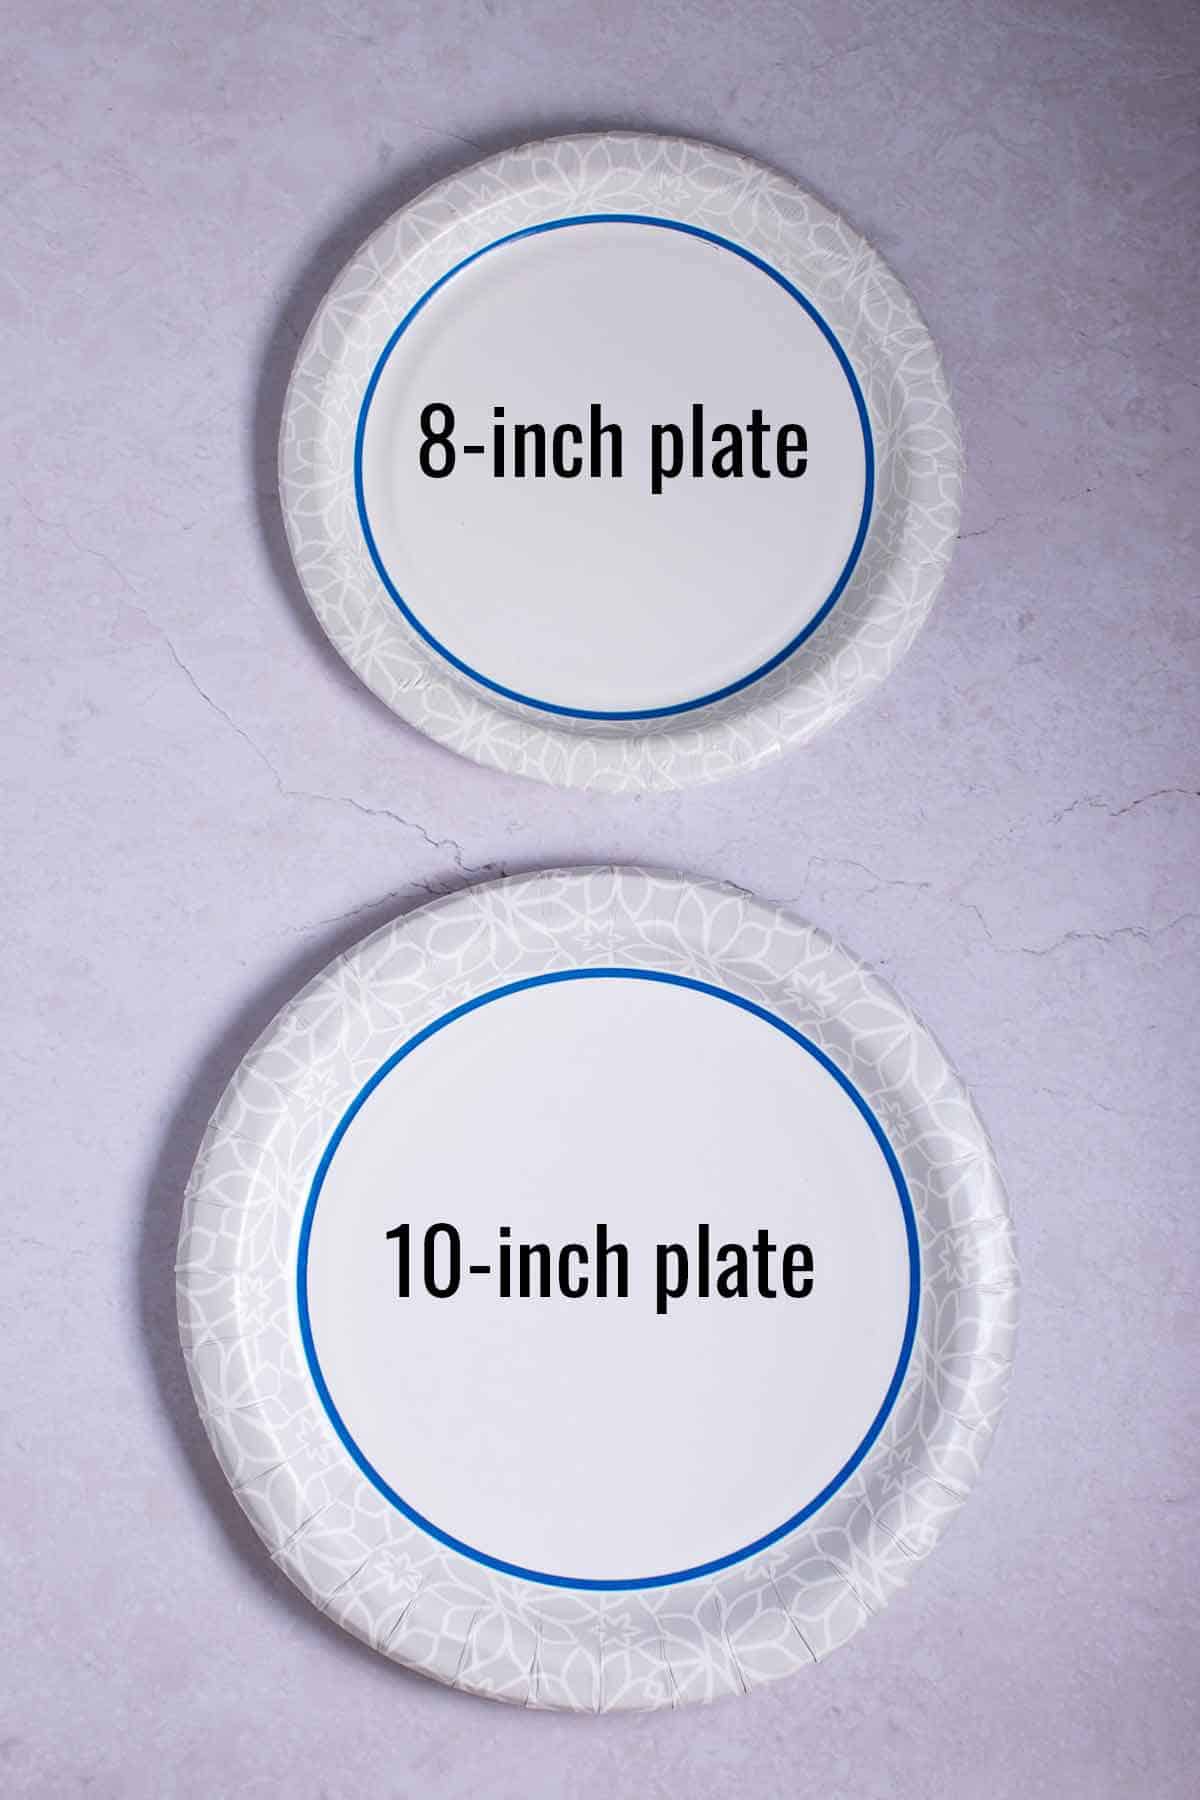 An 8-inch plate and a 10-in plate next to each other.